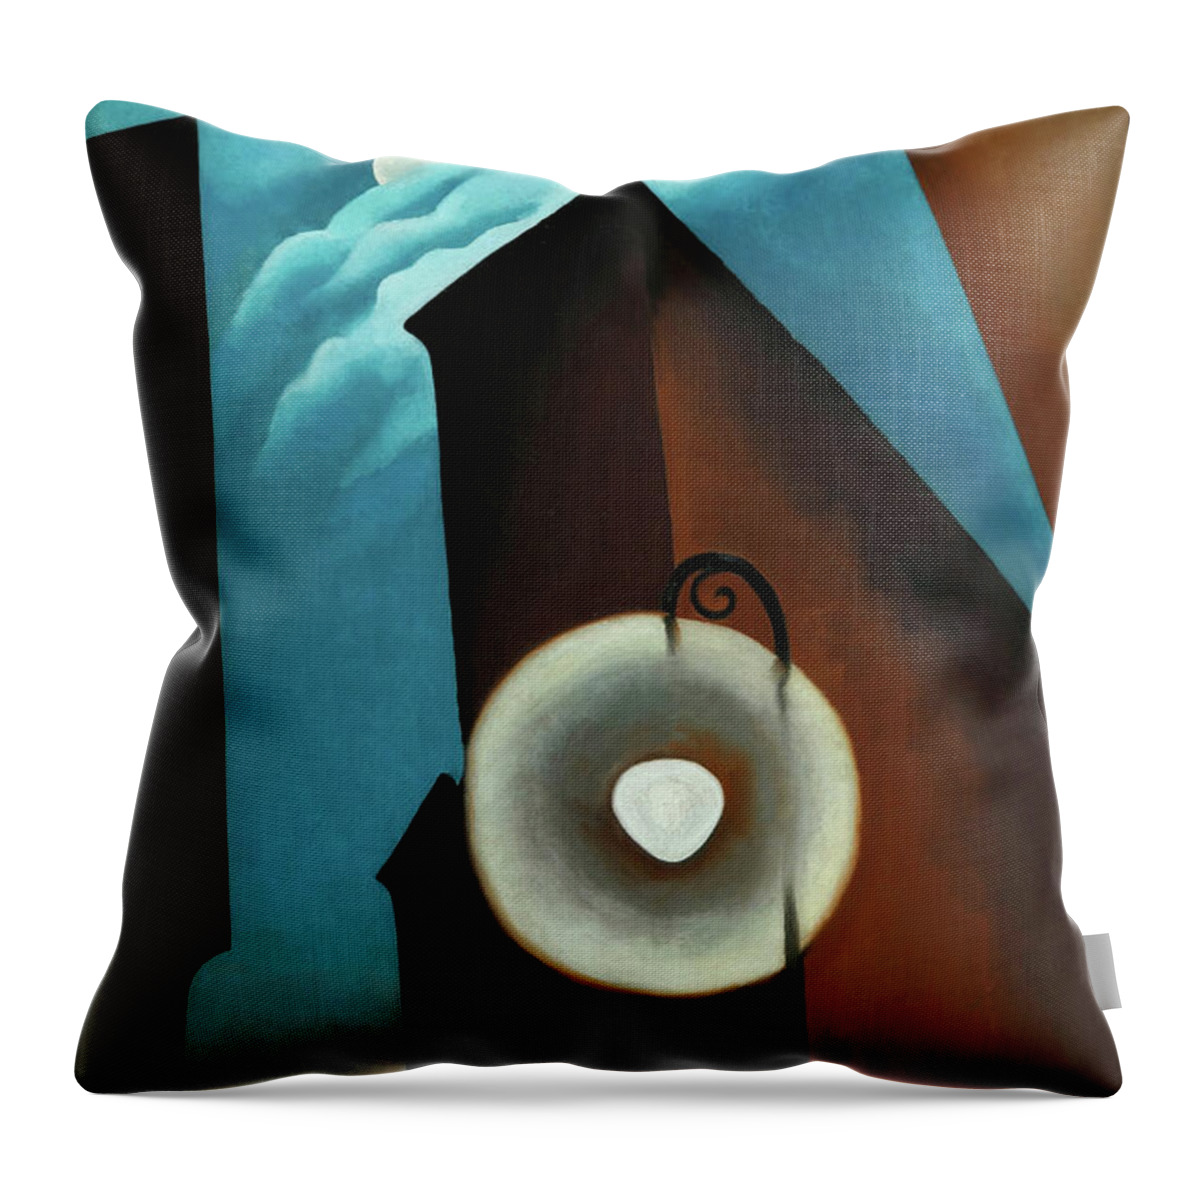 Georgia O'keeffe Throw Pillow featuring the painting New York street with moon - abstract modernist cityscape painting by Georgia O'Keeffe